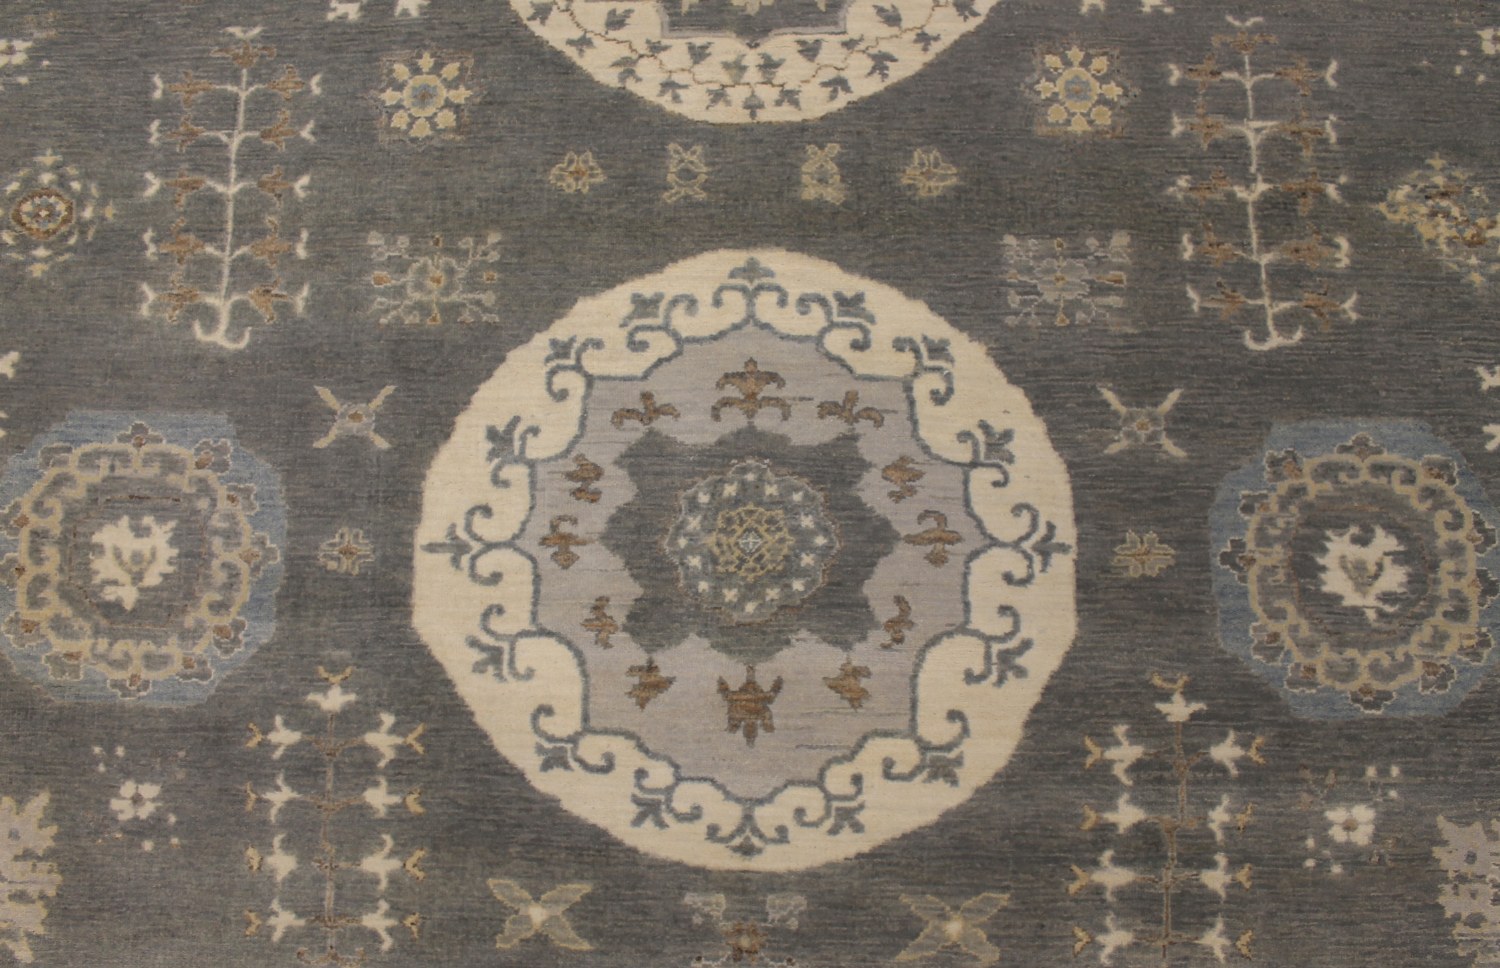 8x10 Aryana & Antique Revivals Hand Knotted Wool Area Rug - MR027453